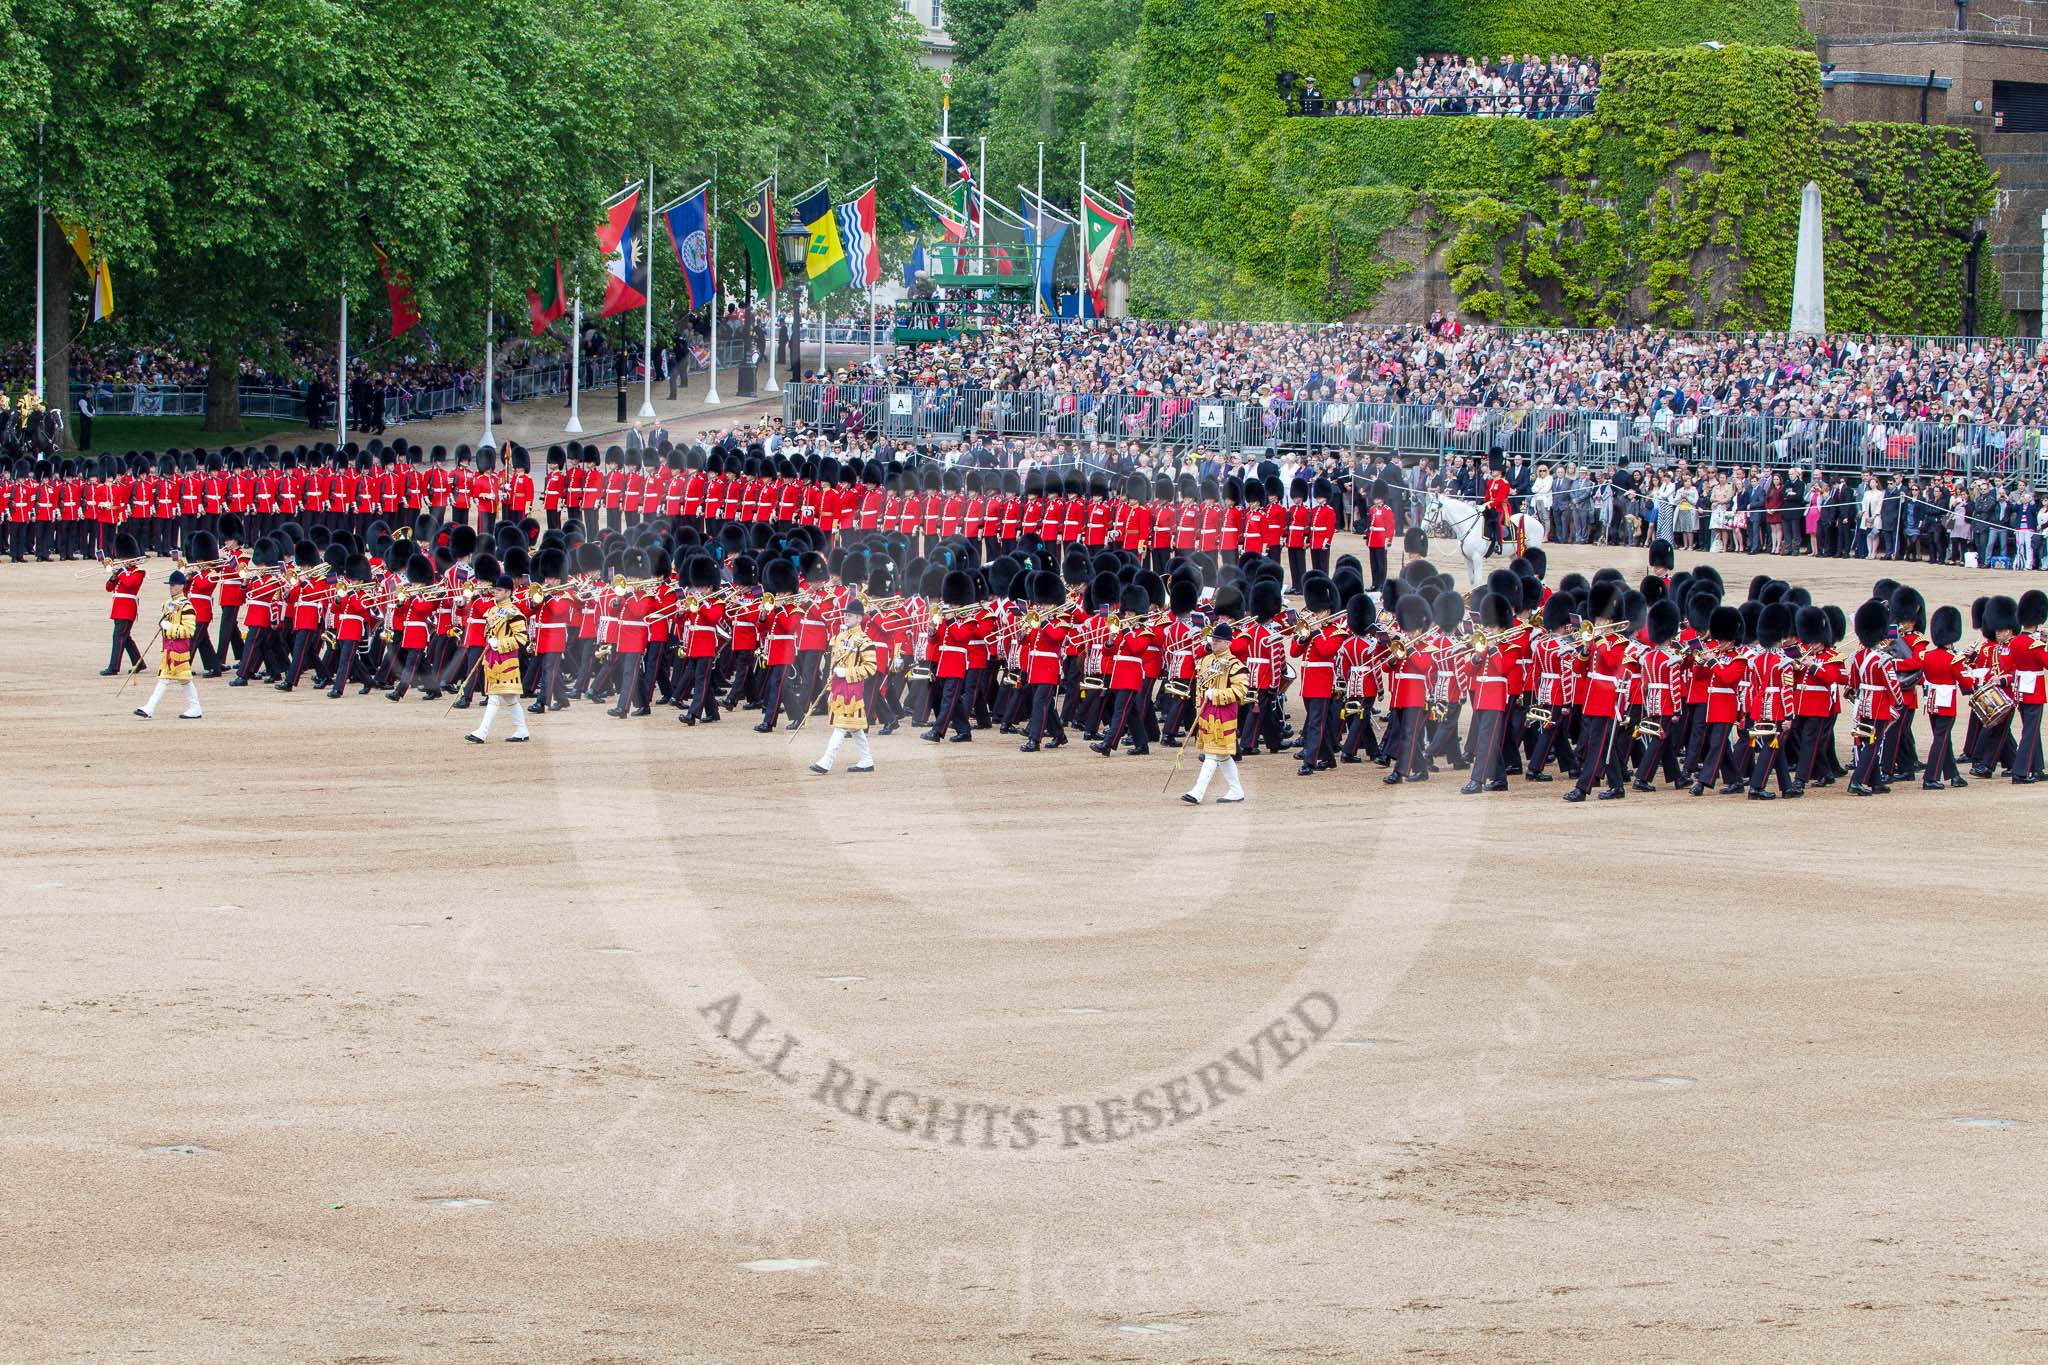 Trooping the Colour 2013: The Massed Band Troop - the countermarch in quick time is Heroes' Return. Behind the massed bands is No. 6 Guard, and next to them the Adjutant of the Parade and the Colour Party. Image #403, 15 June 2013 11:11 Horse Guards Parade, London, UK